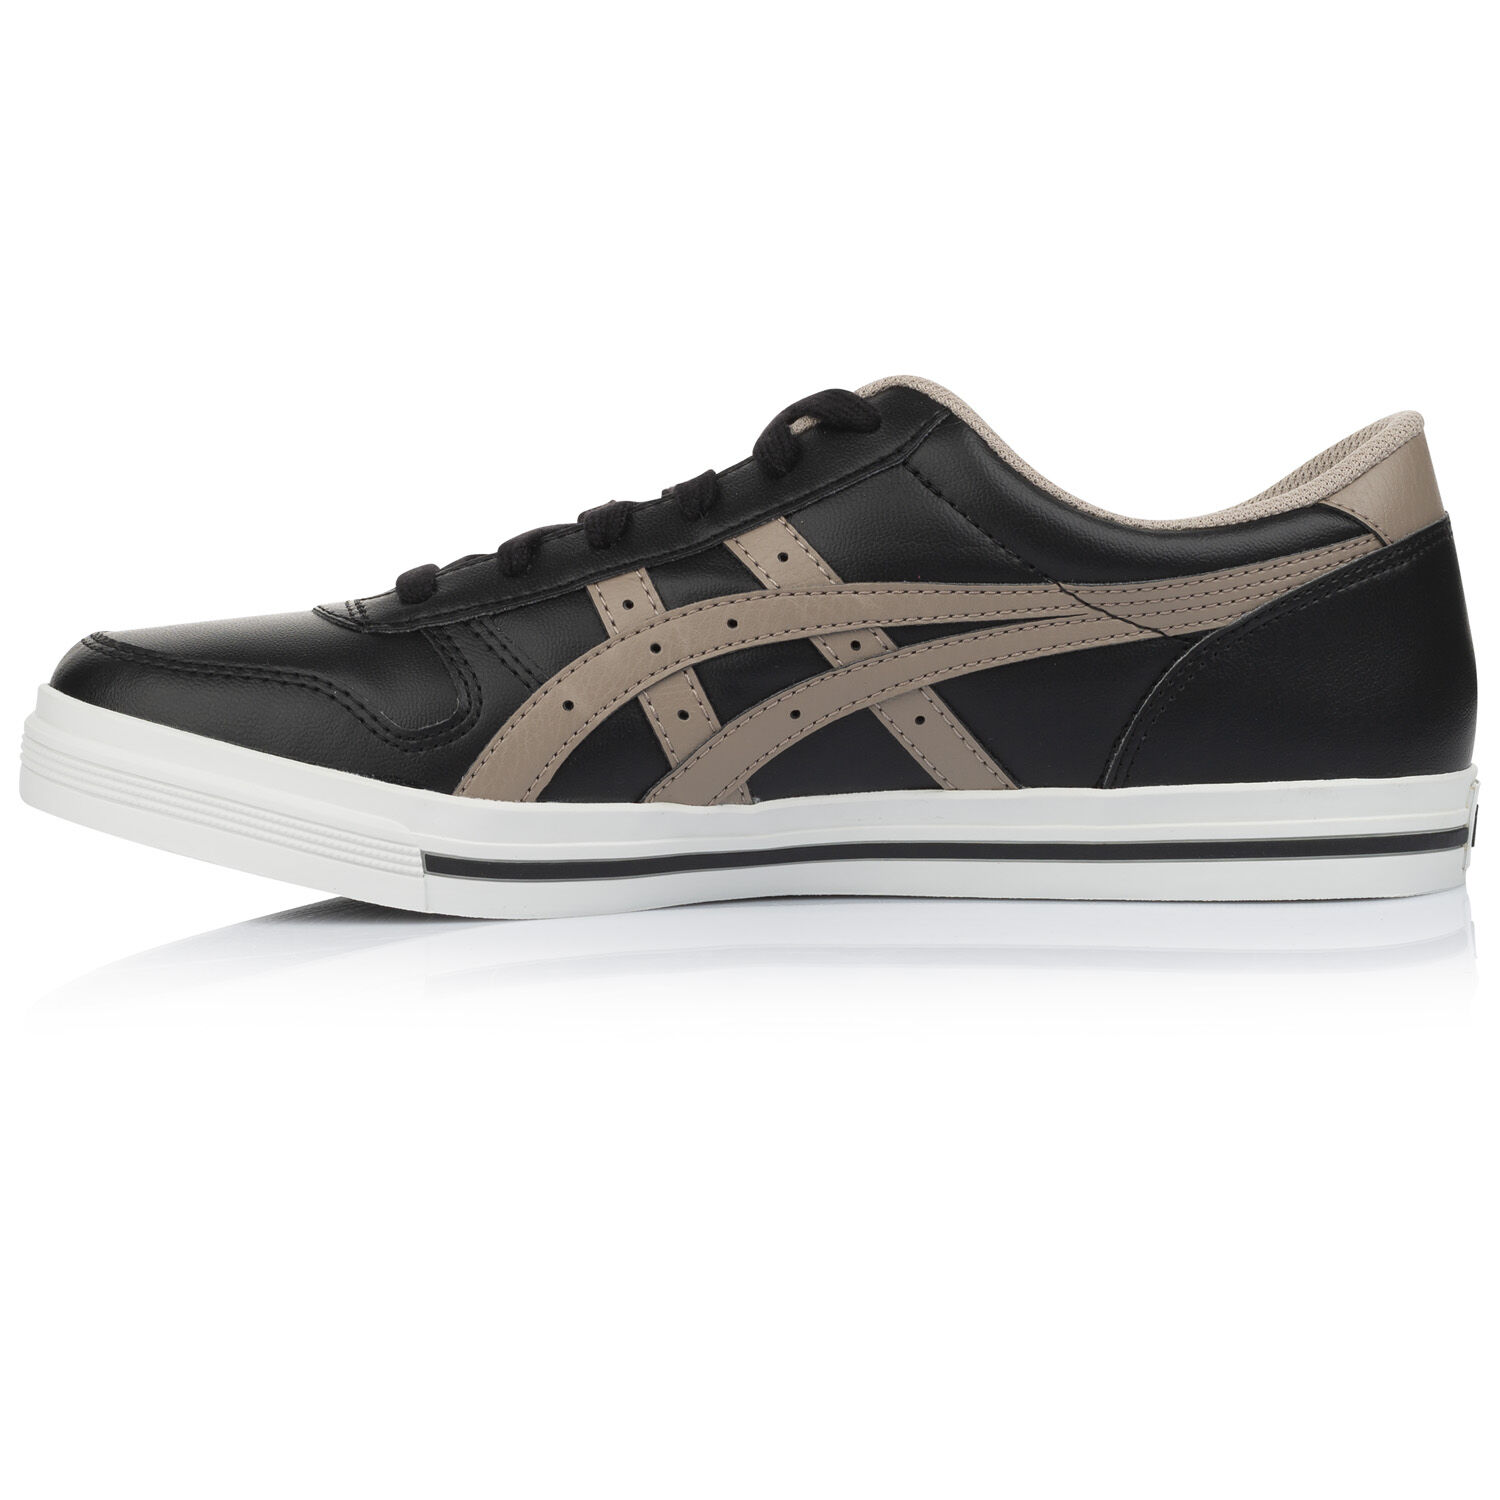 Asics Tiger Aaron Leather Sneaker